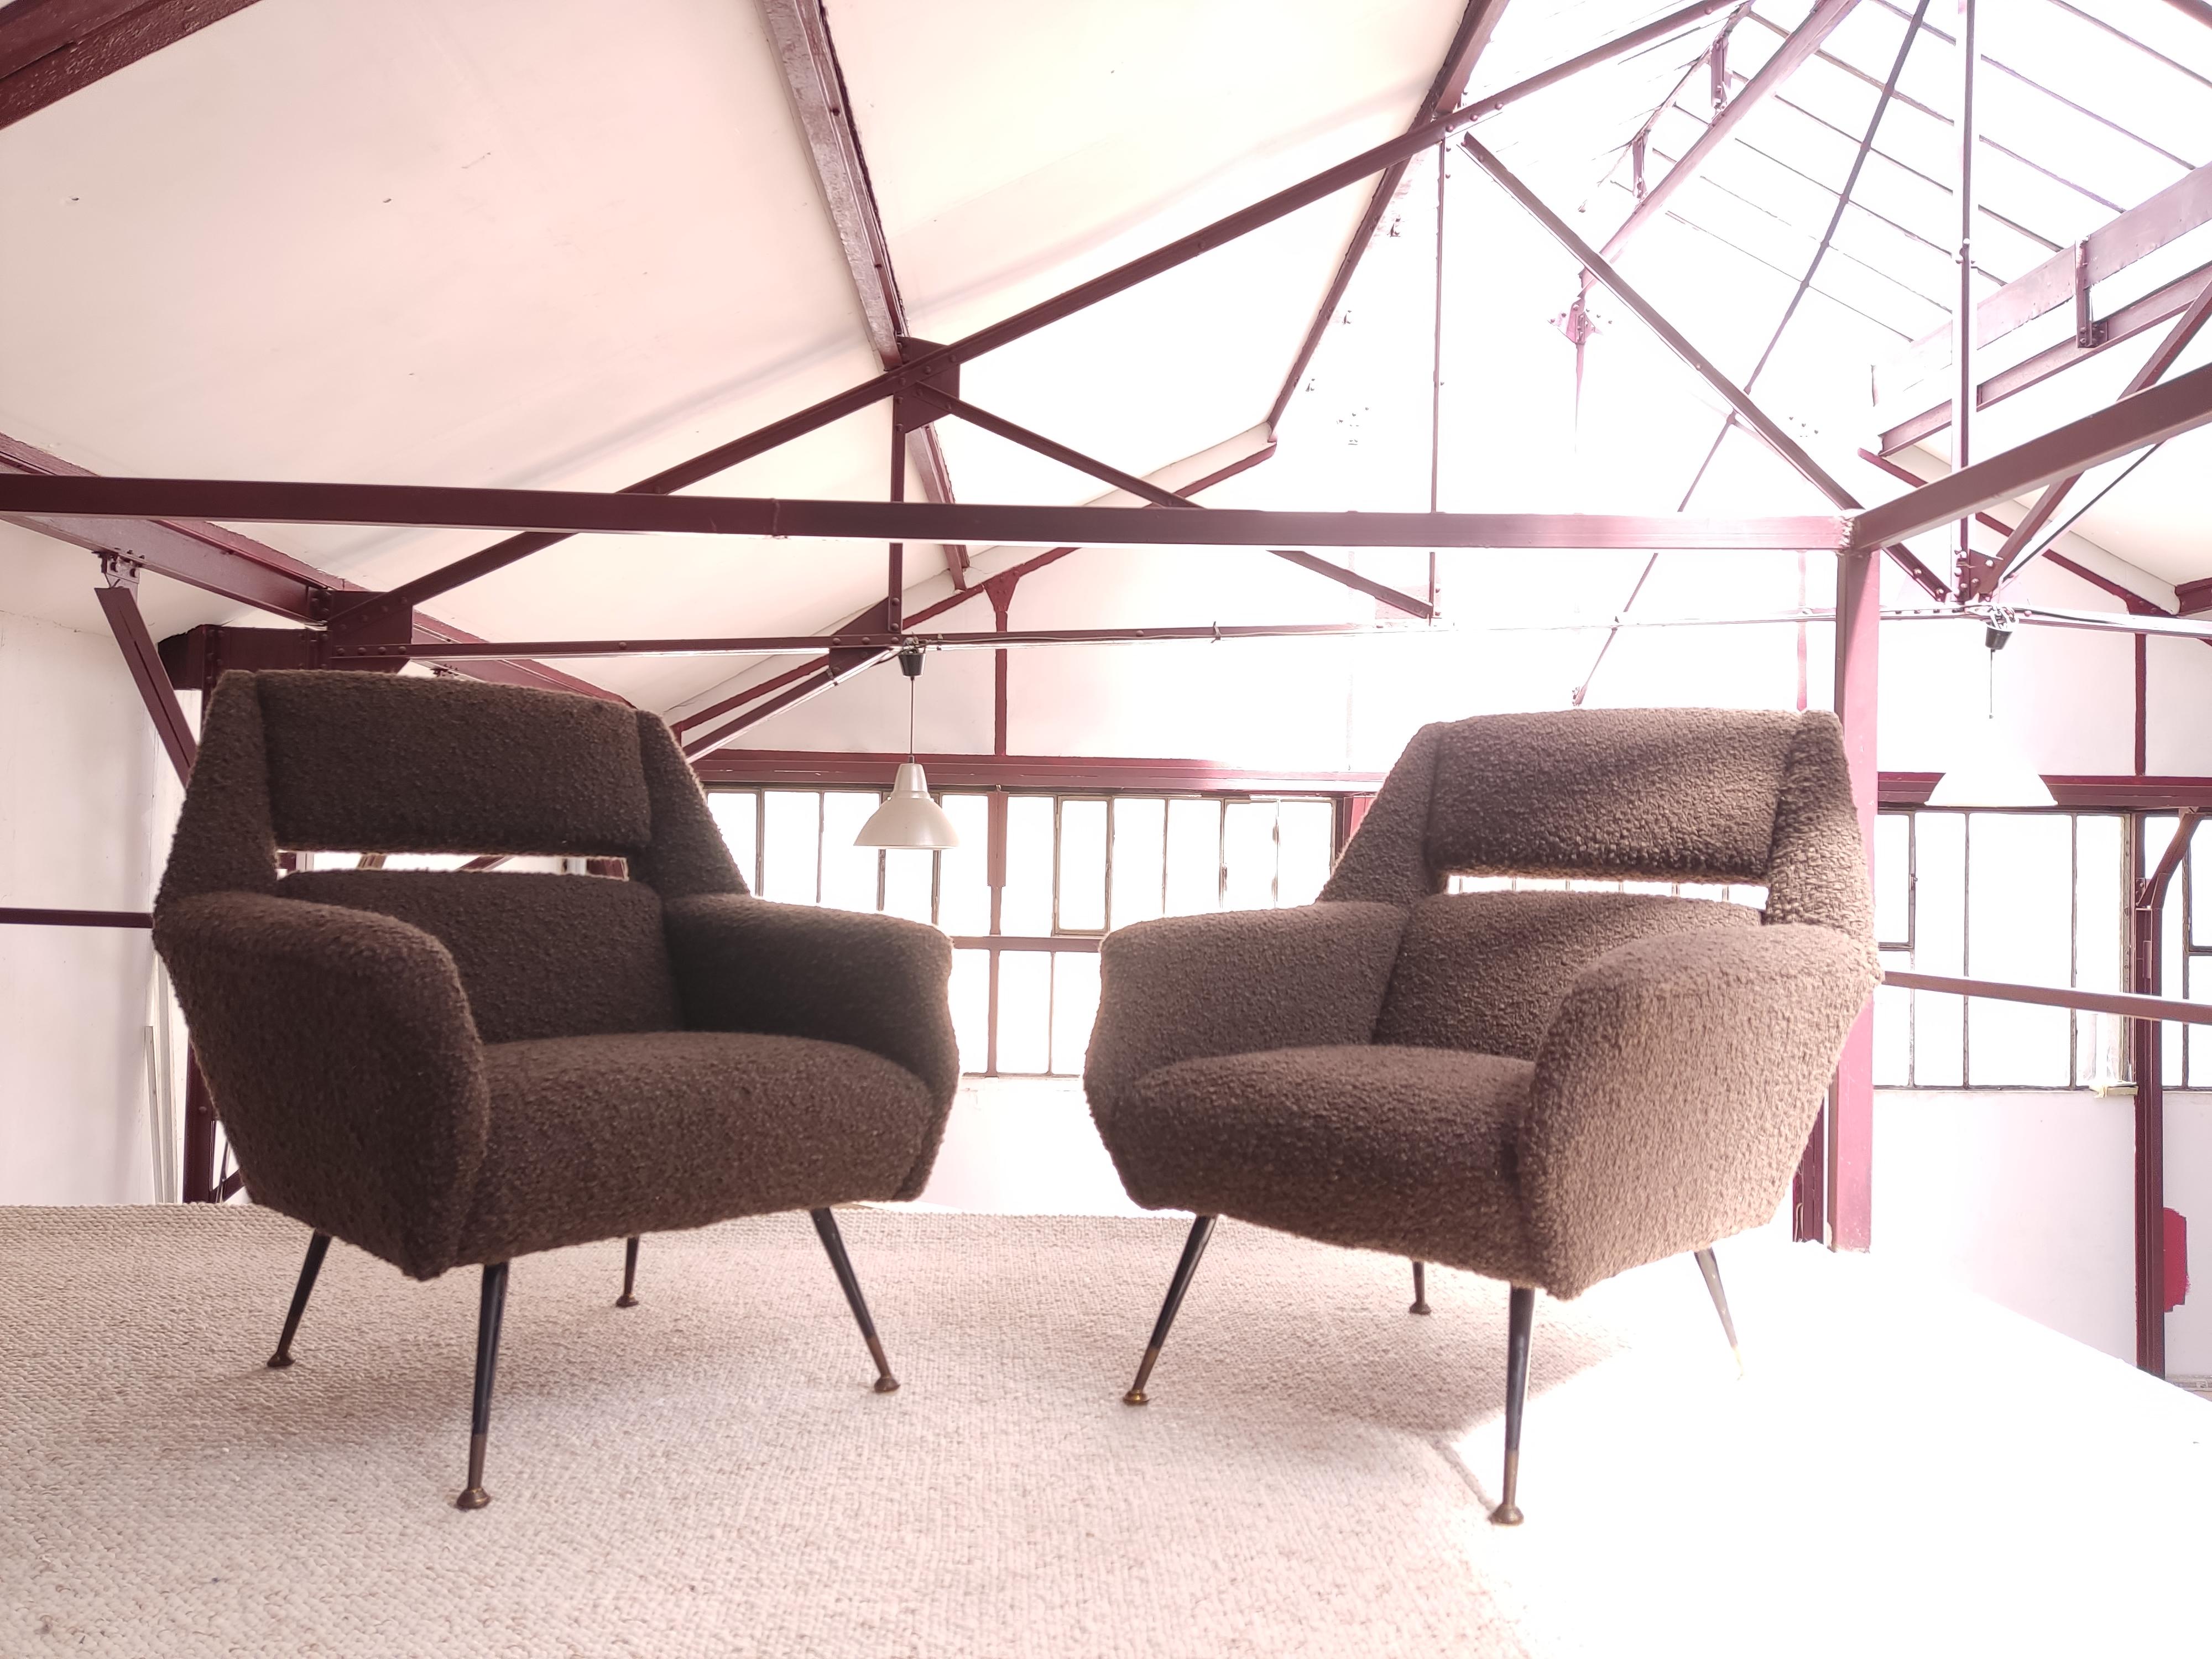 Mid-Century Modern Pair of Italian Armchairs 1950, Reupholstered in Chocolate Bouclé